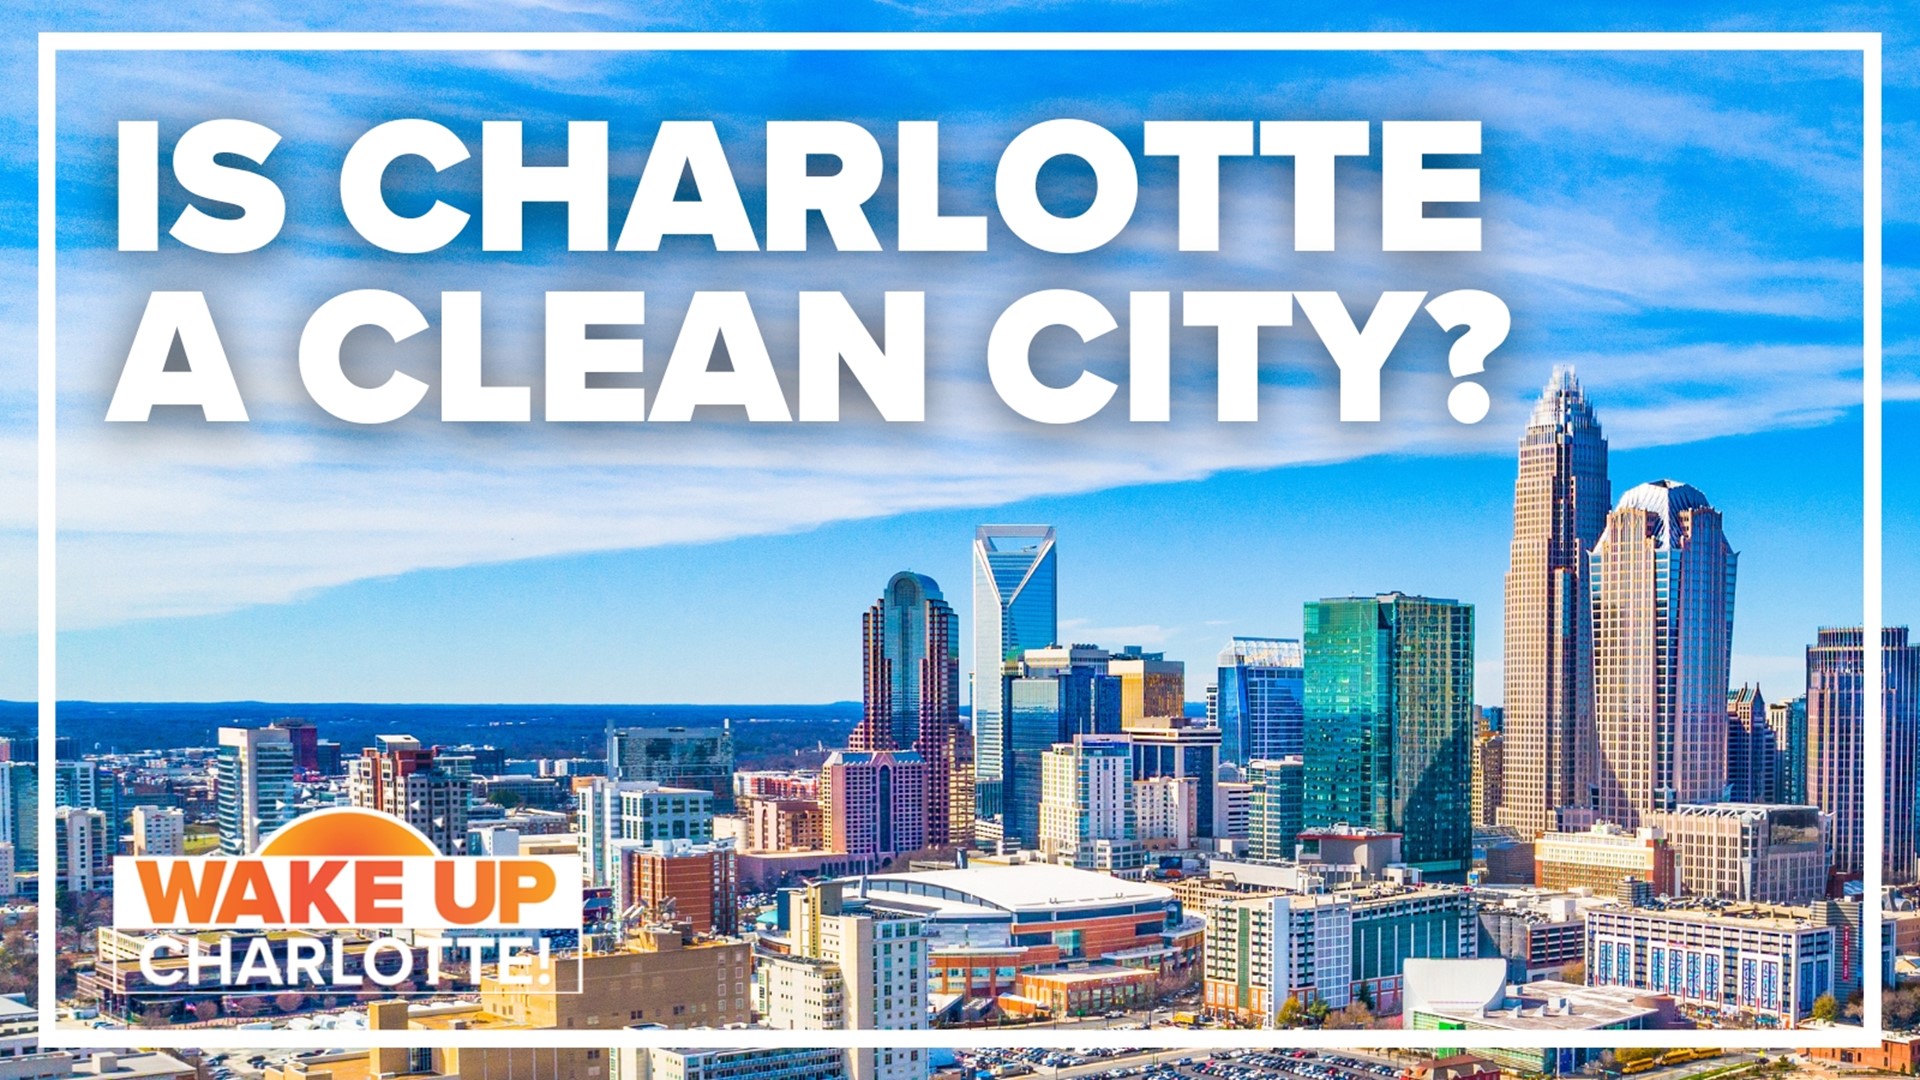 Charlotte is now ranked one of the cleanest cities in America.